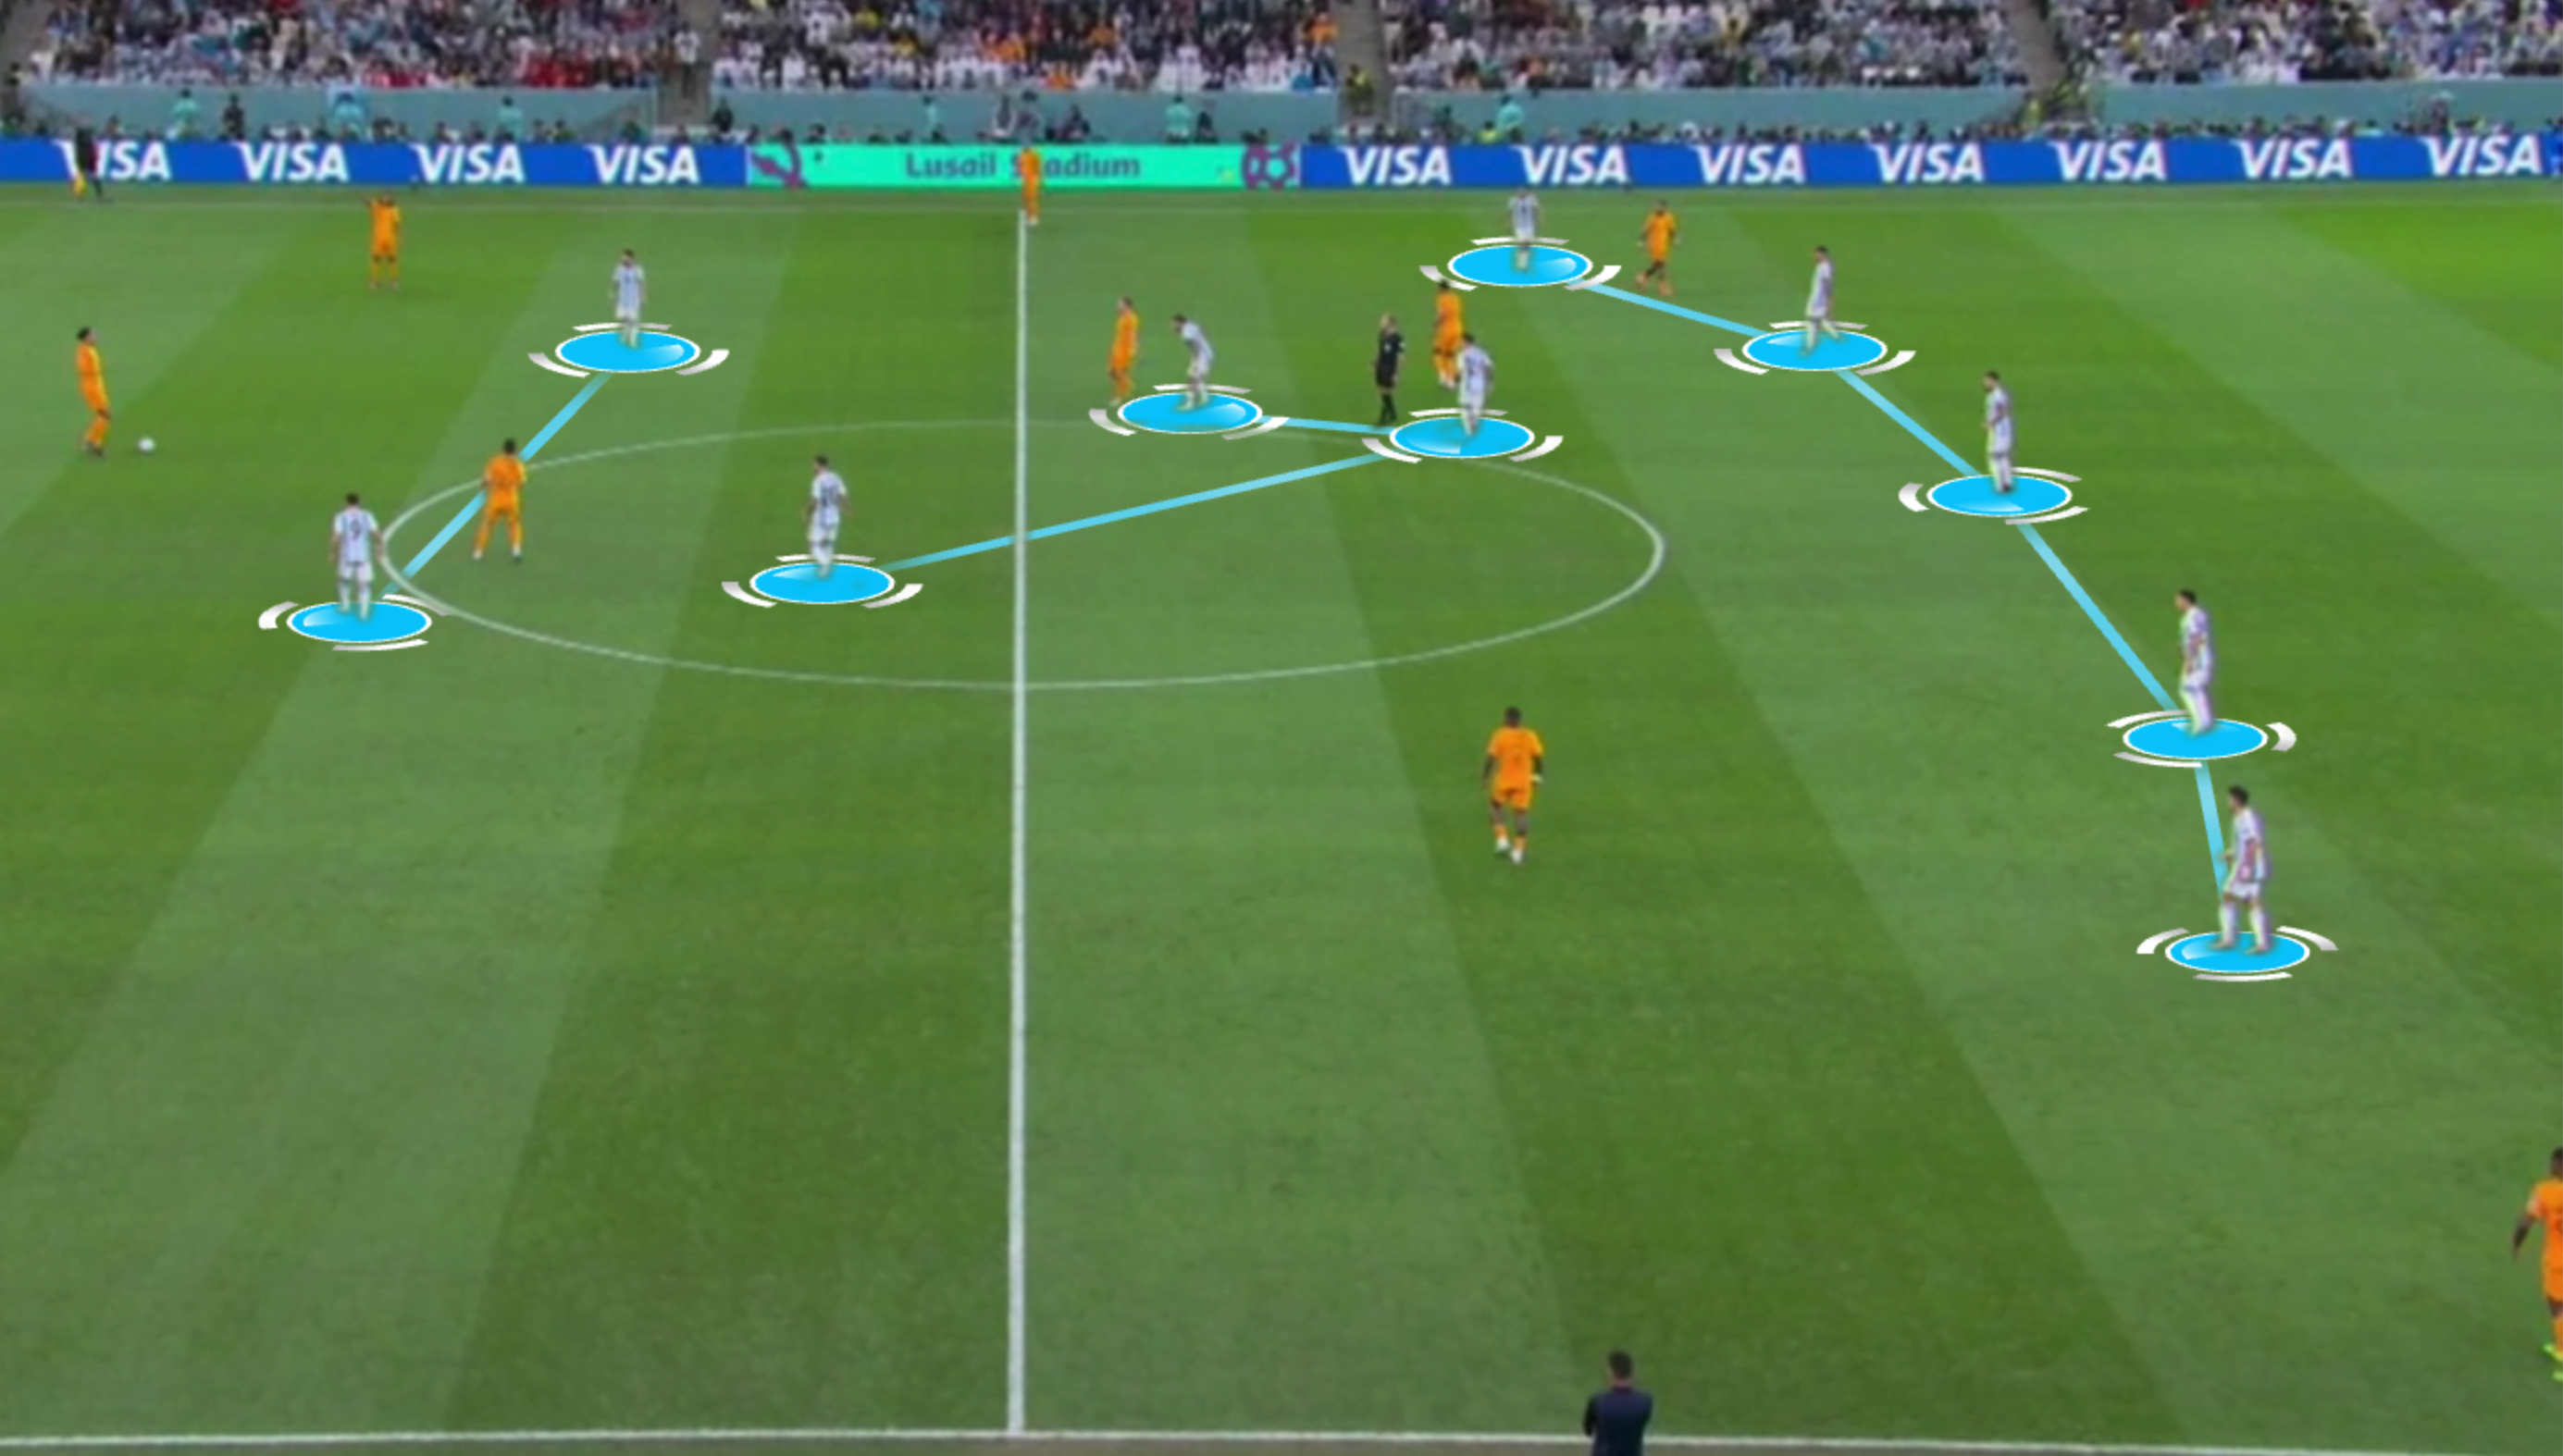 Portugal (World Cup 2022) - Tactical analysis